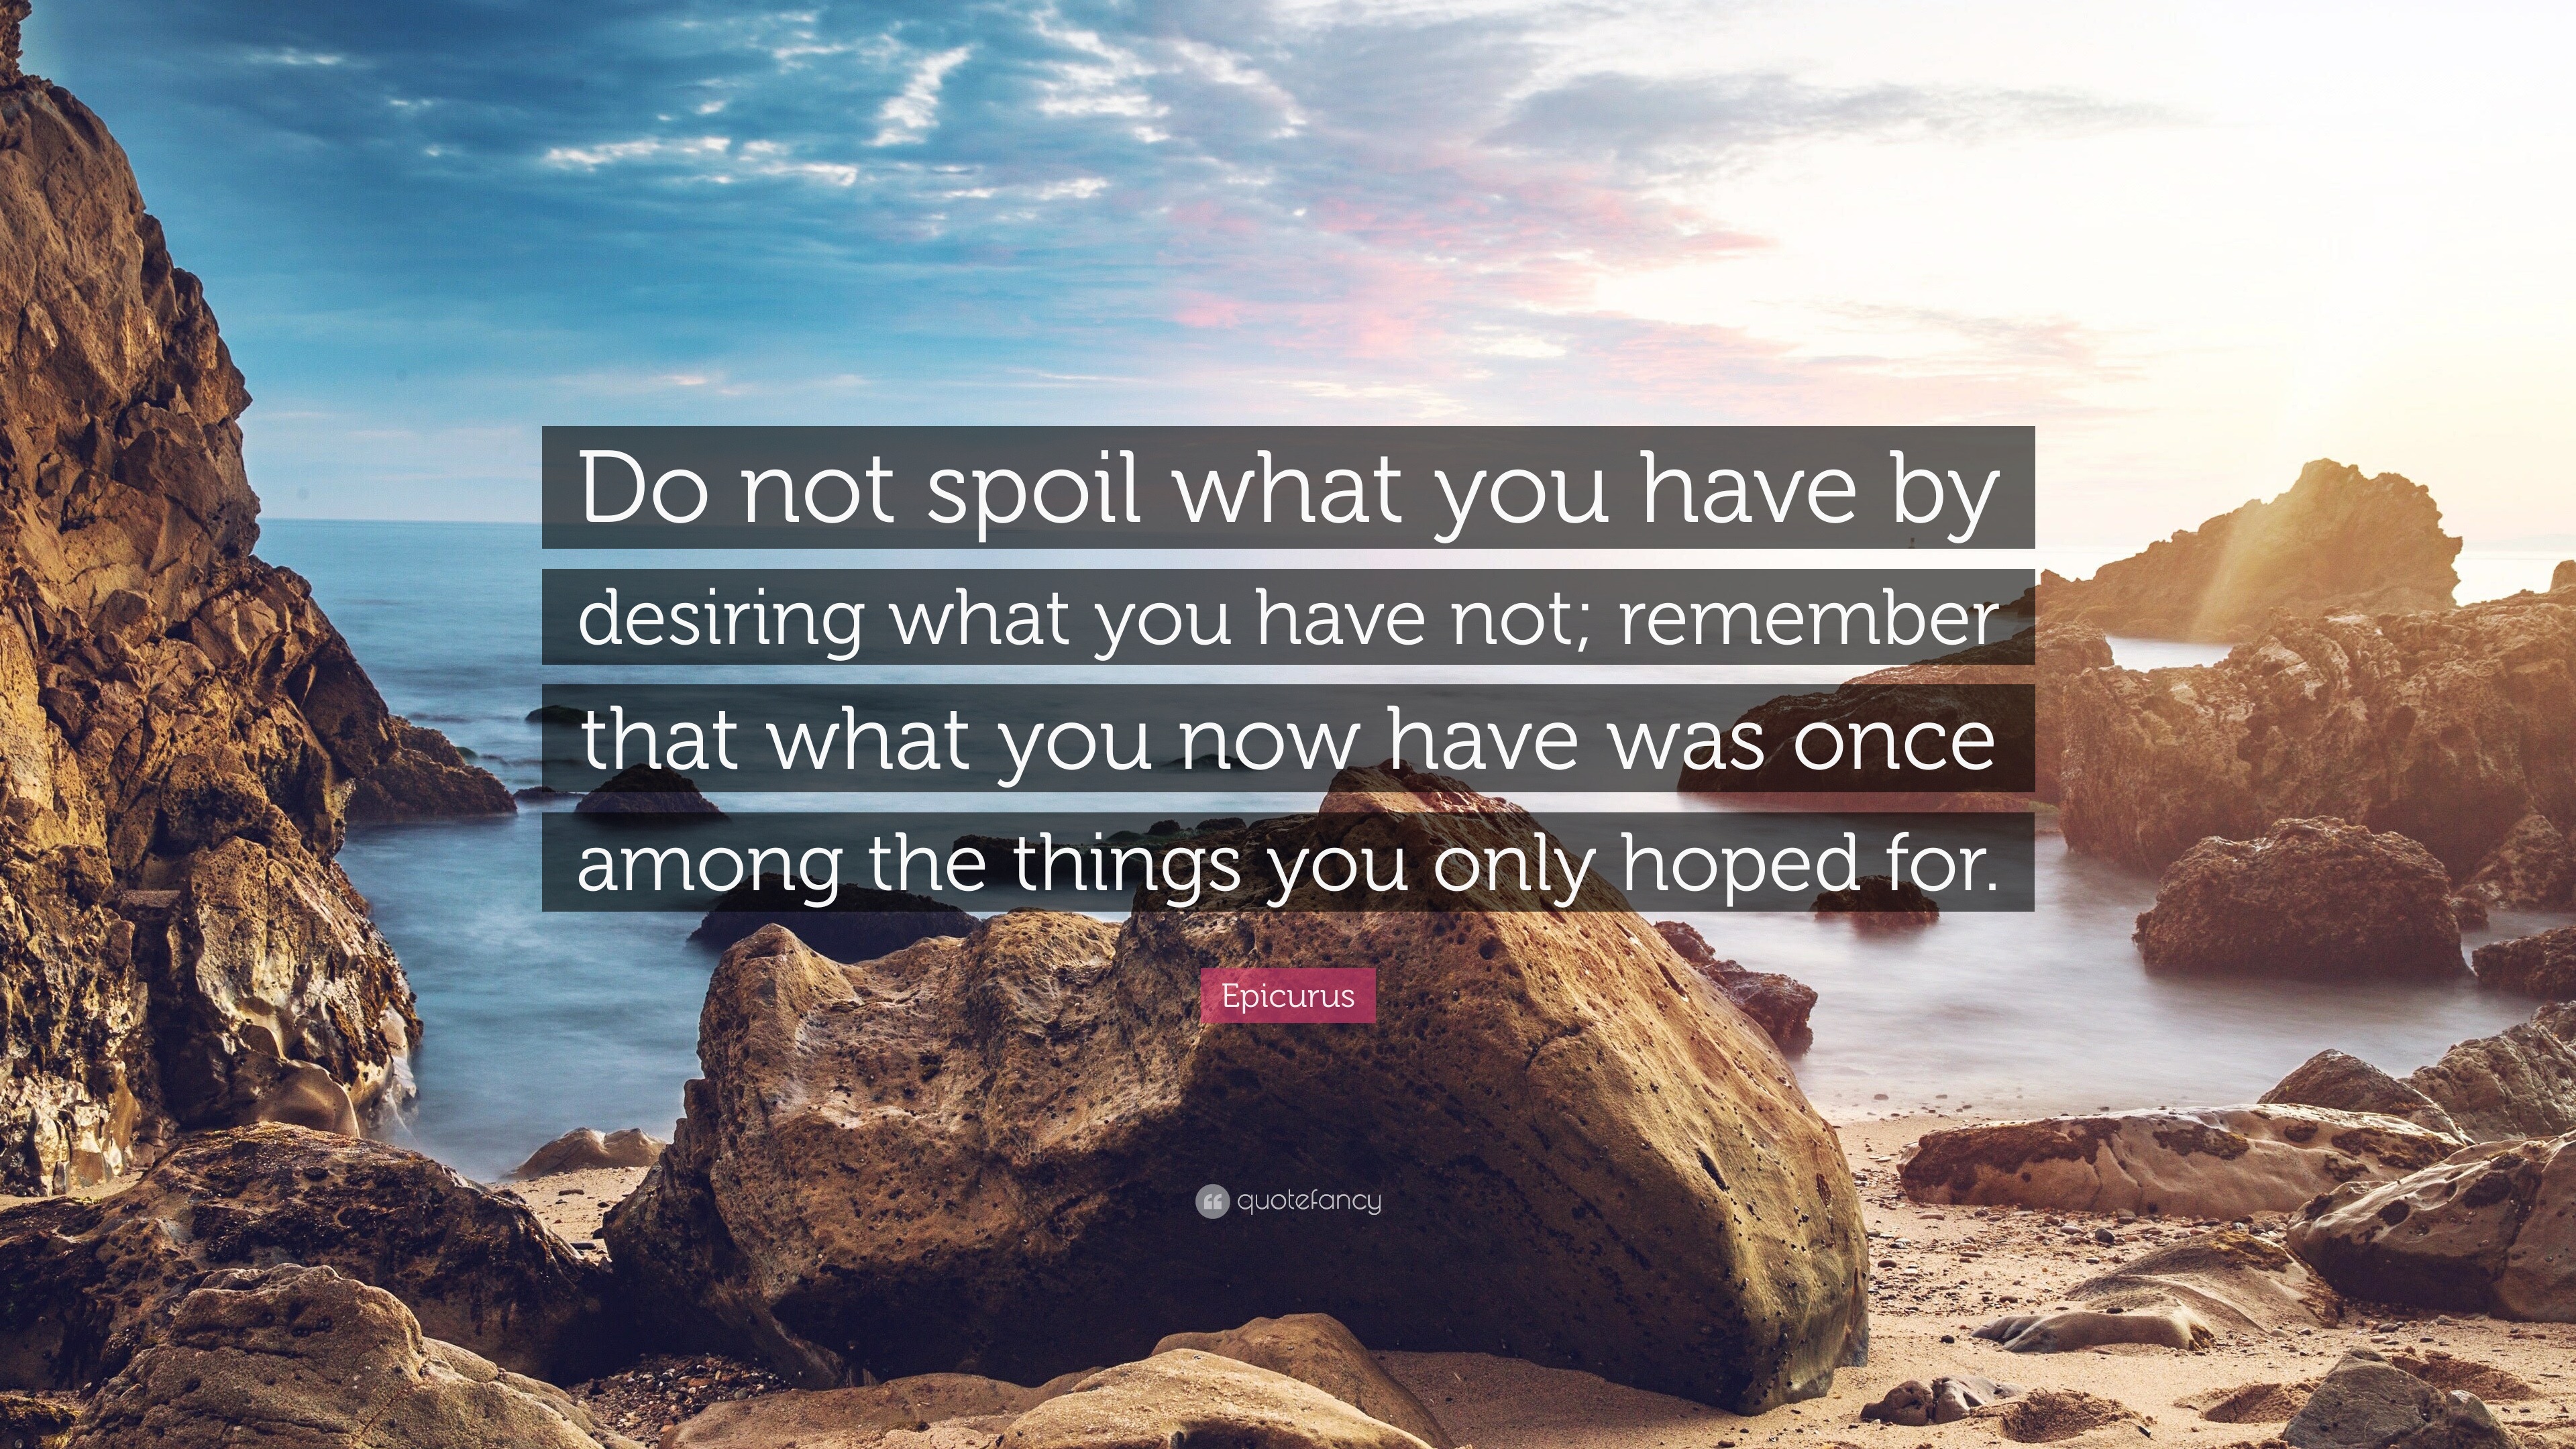 FranklinCovey - Do not spoil what you have by desiring what you